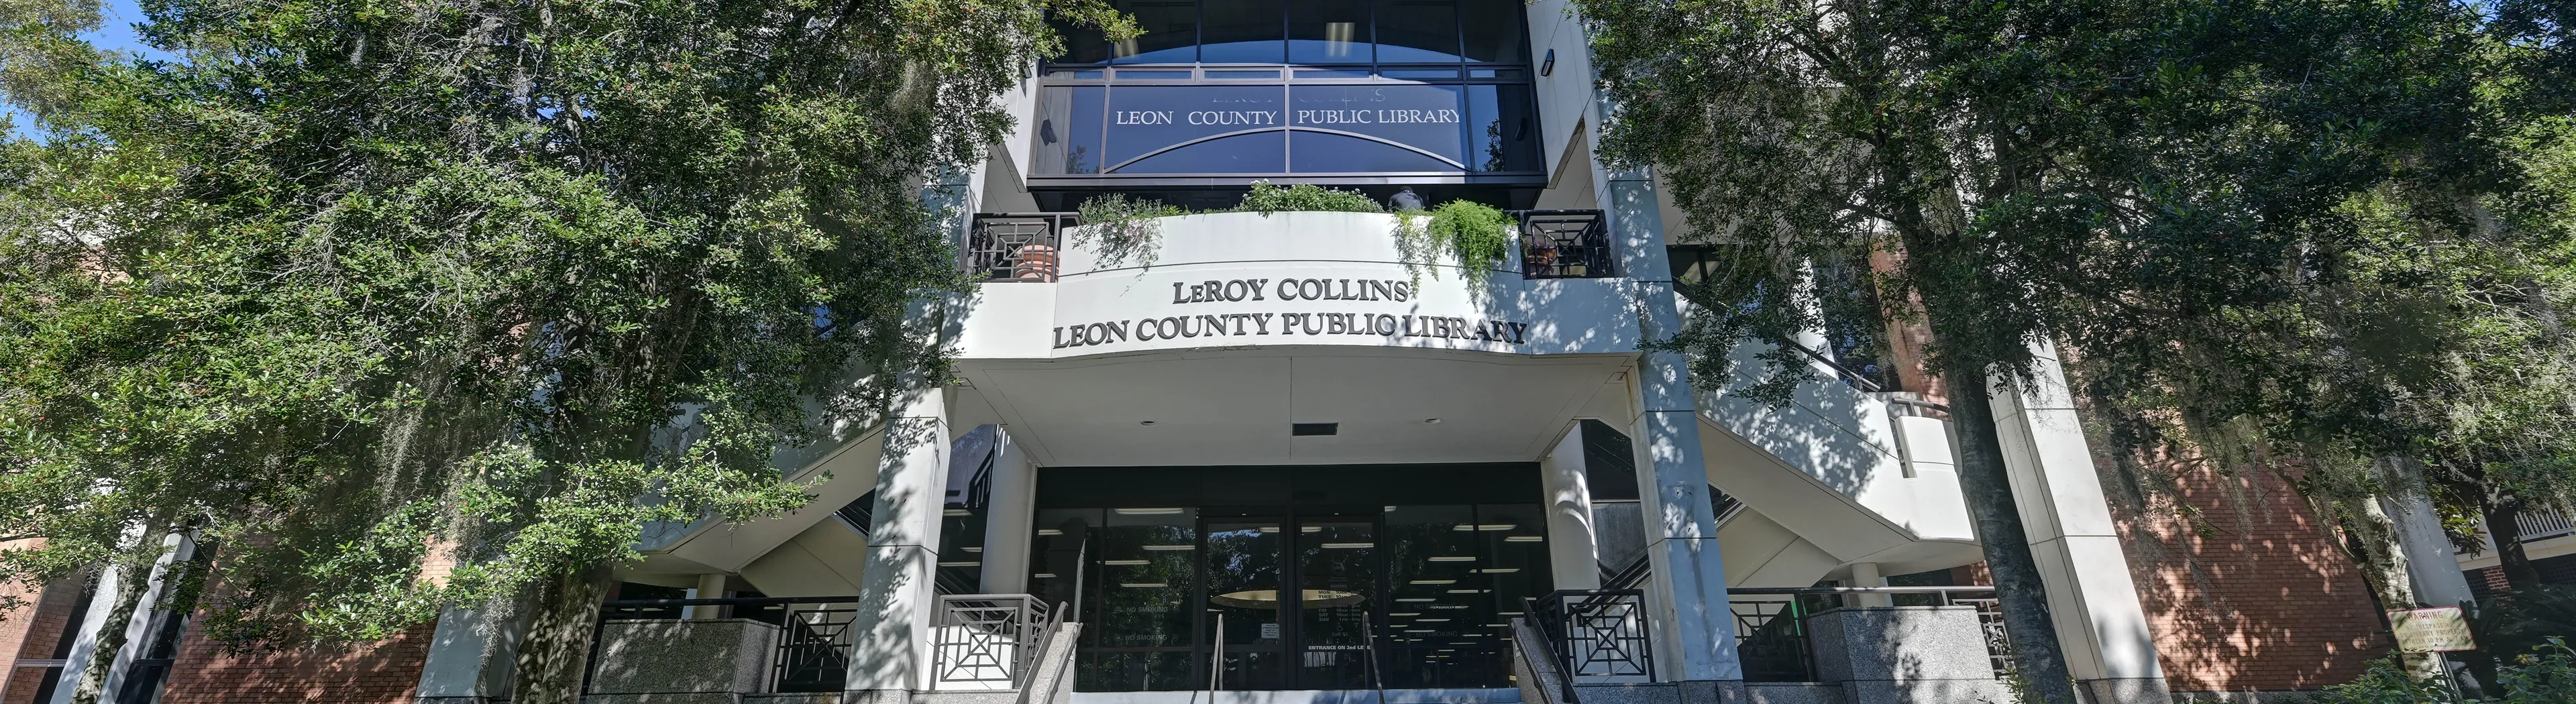 LeRoy Collins Leon County Main Library building exterior